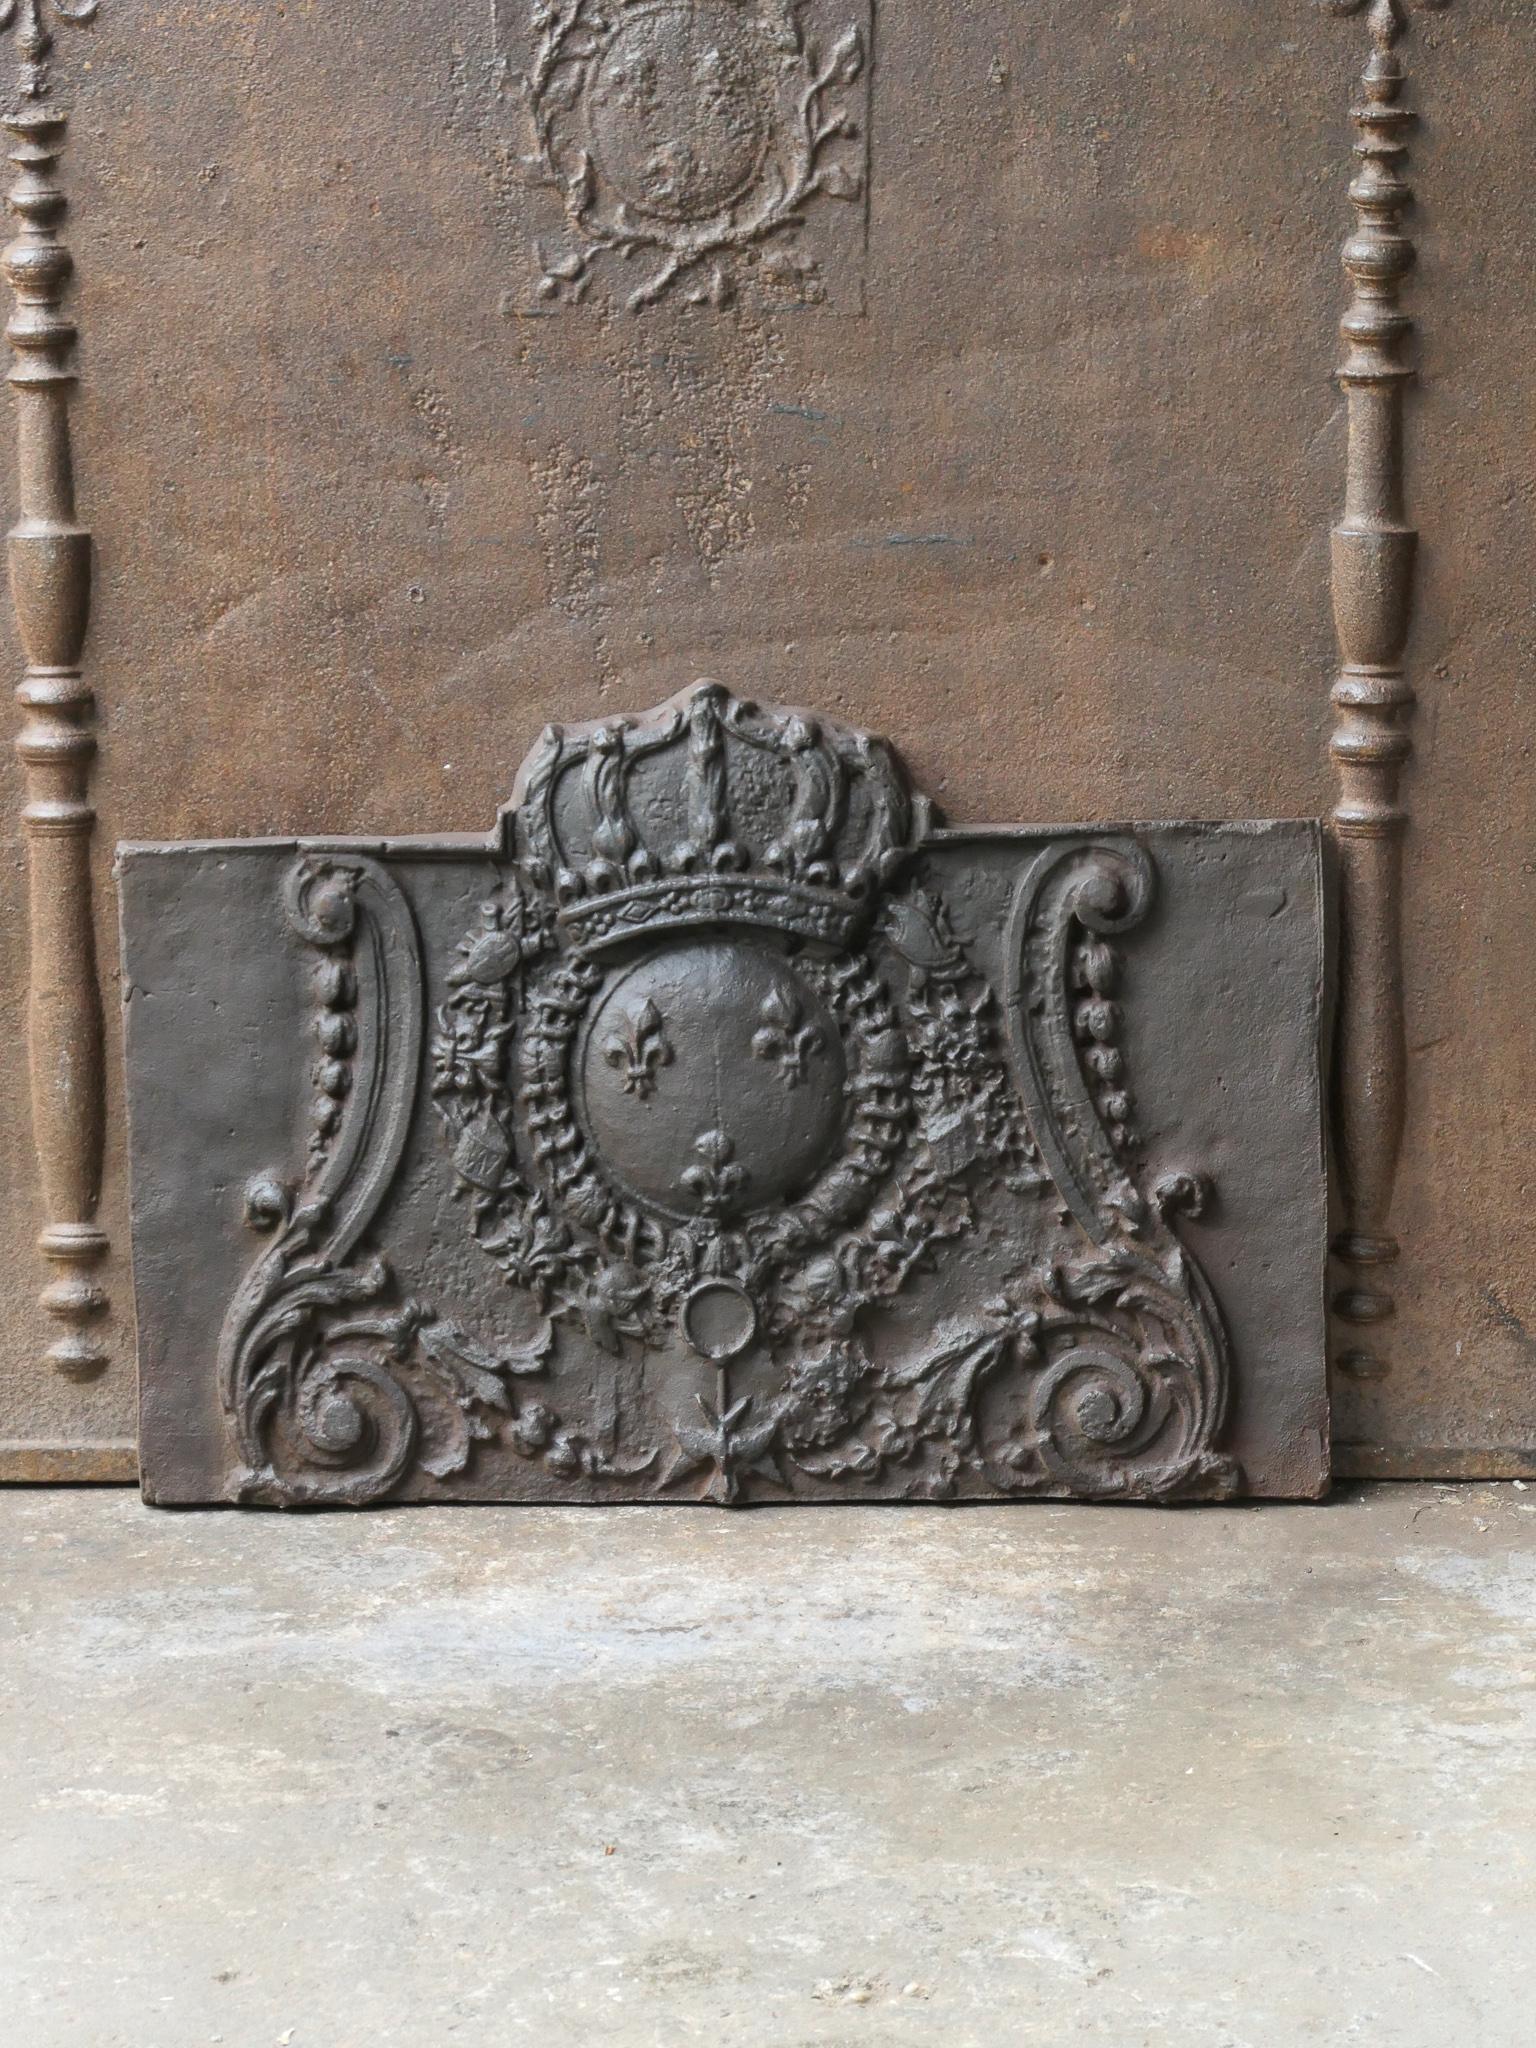 20th Century French Louis XIV style fireback with the arms of France. Coat of arms of the House of Bourbon, an originally French royal house that became a major dynasty in Europe. It delivered kings for Spain (Navarra), France, both Sicilies and